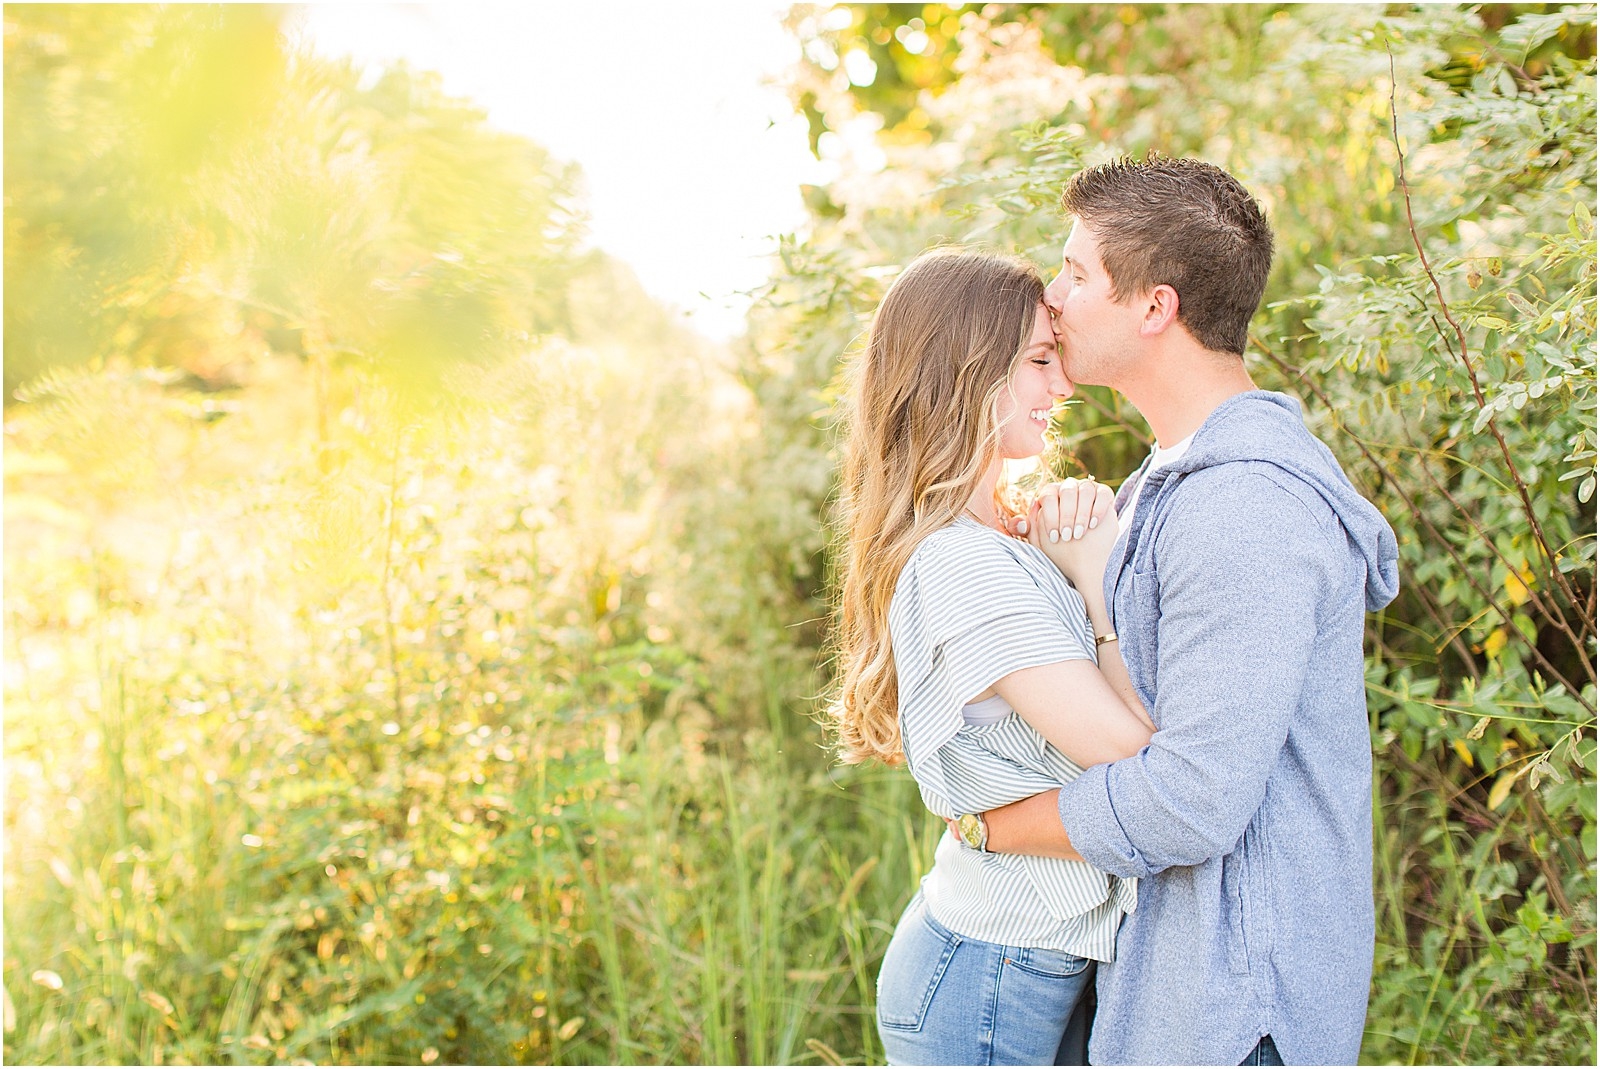 A Jasper Indiana Engagement Session | Tori and Kyle | Bret and Brandie Photography013.jpg